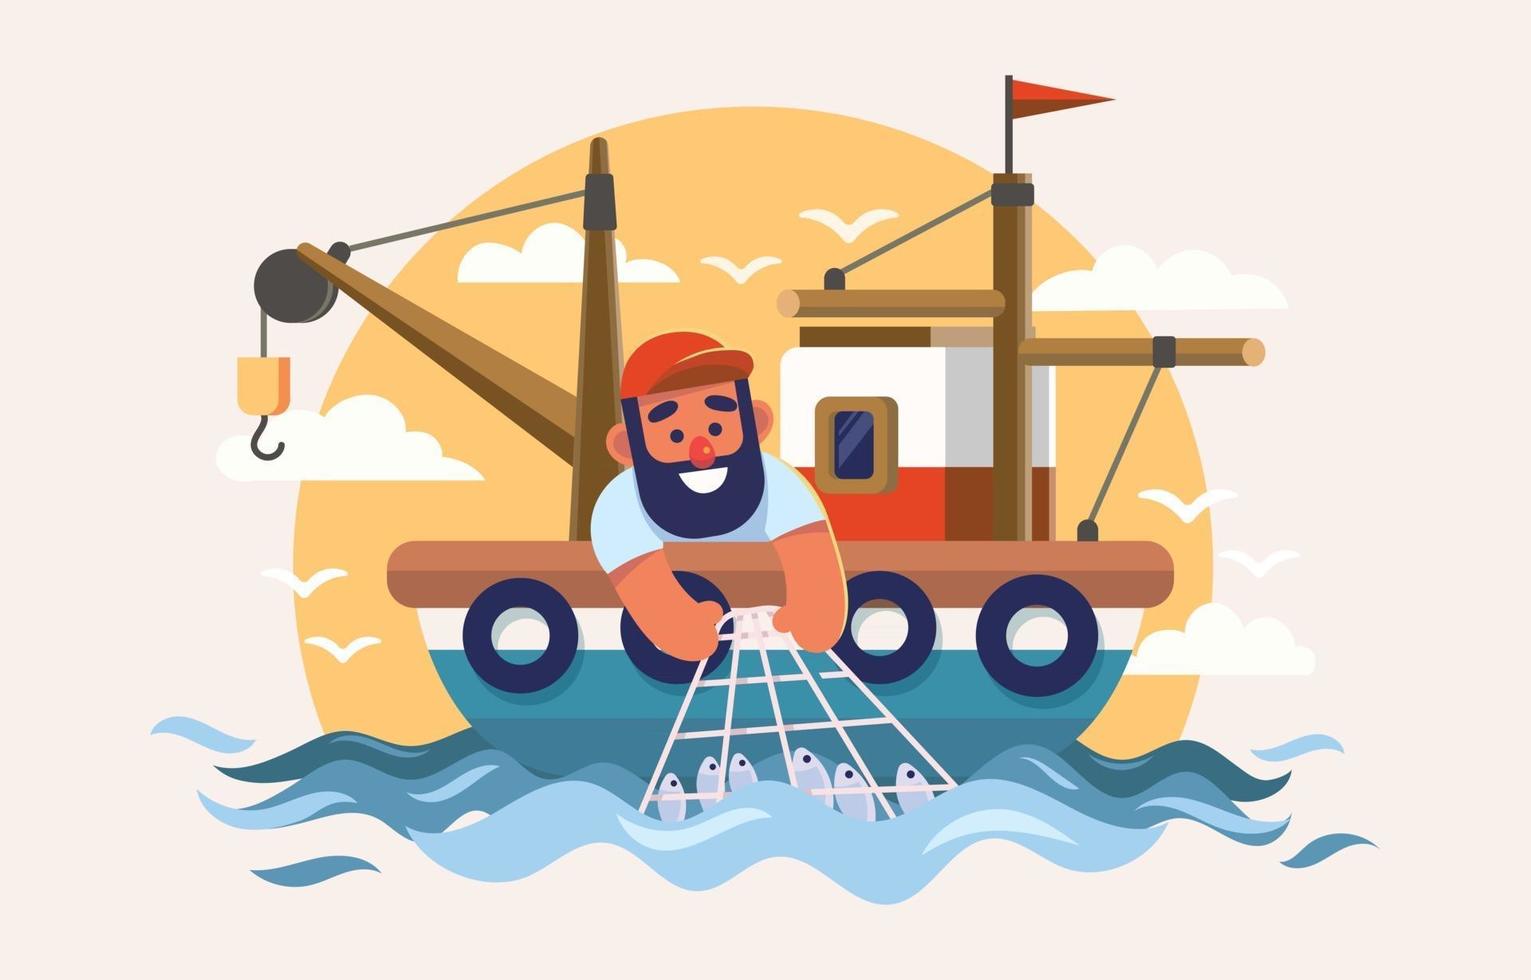 https://static.vecteezy.com/system/resources/previews/002/622/655/non_2x/fisherman-in-boat-catch-a-lot-fish-free-vector.jpg